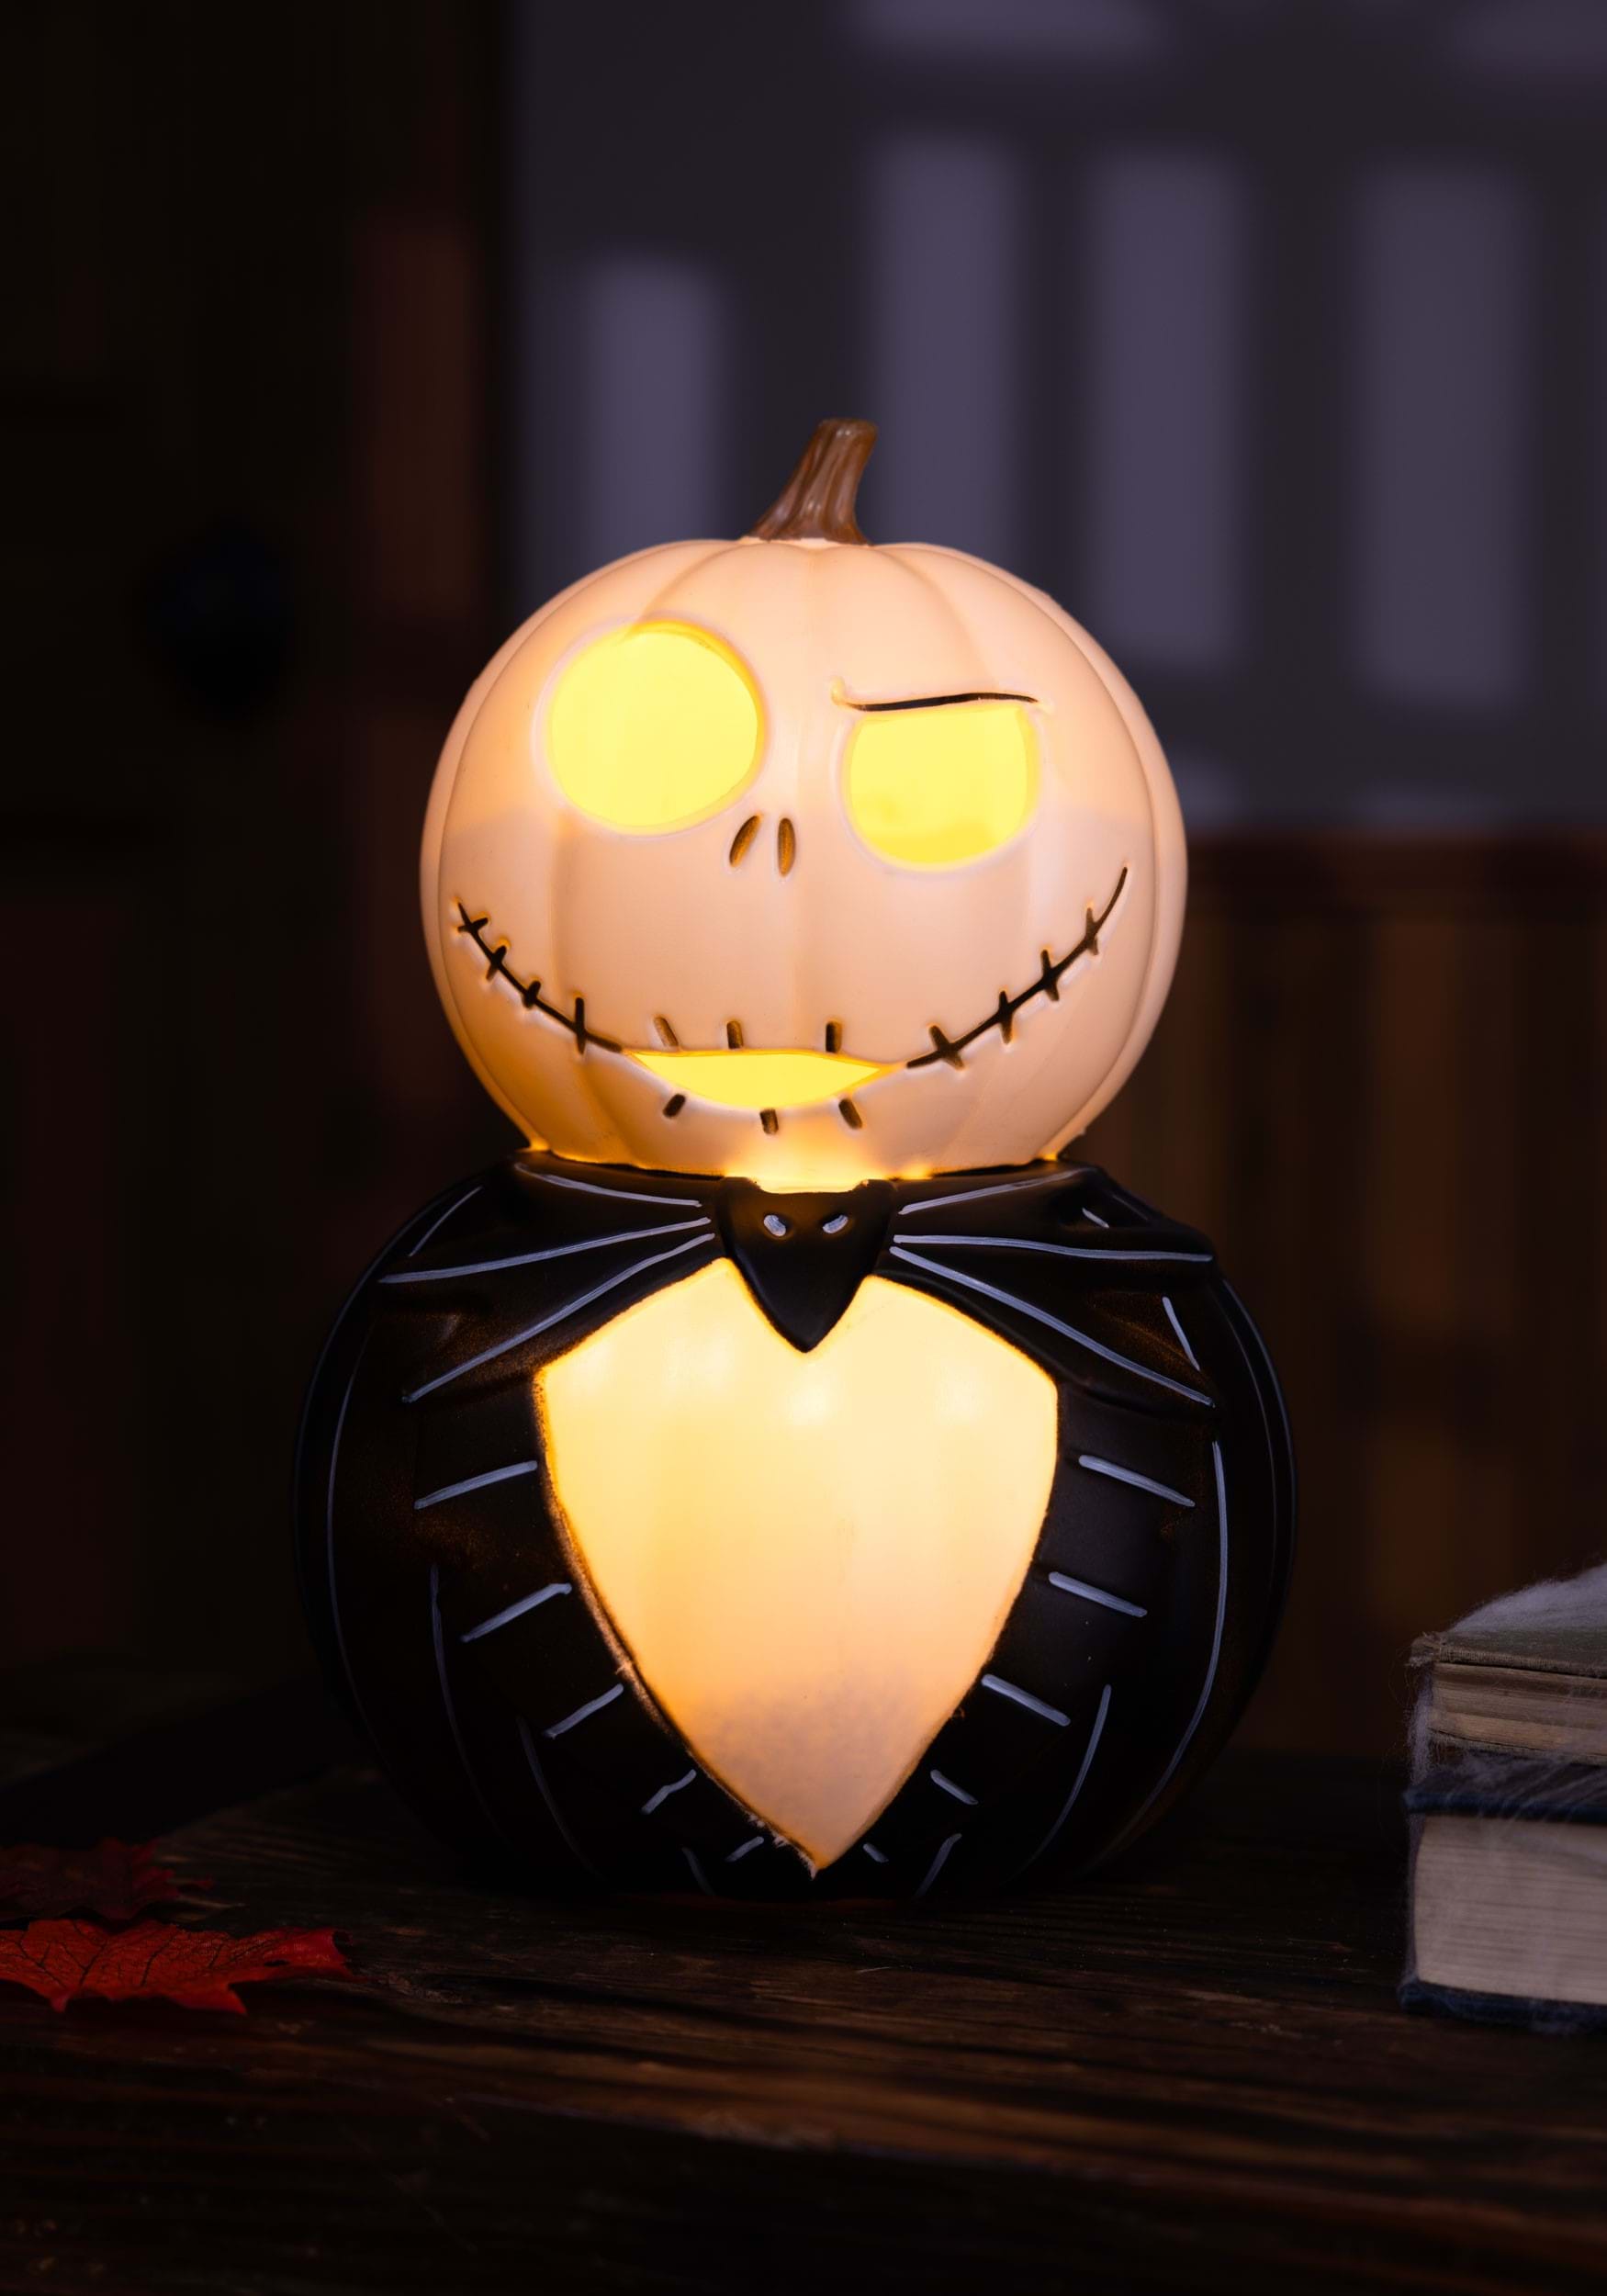 Nightmare Before Christmas Black Light Village Collection | Relive the  ghoulish delights of The Nightmare Before Christmas with this spook-tacular  collection that casts an eerie glow. Shop Now! https://bit.ly/2Cz3ruW | By  The